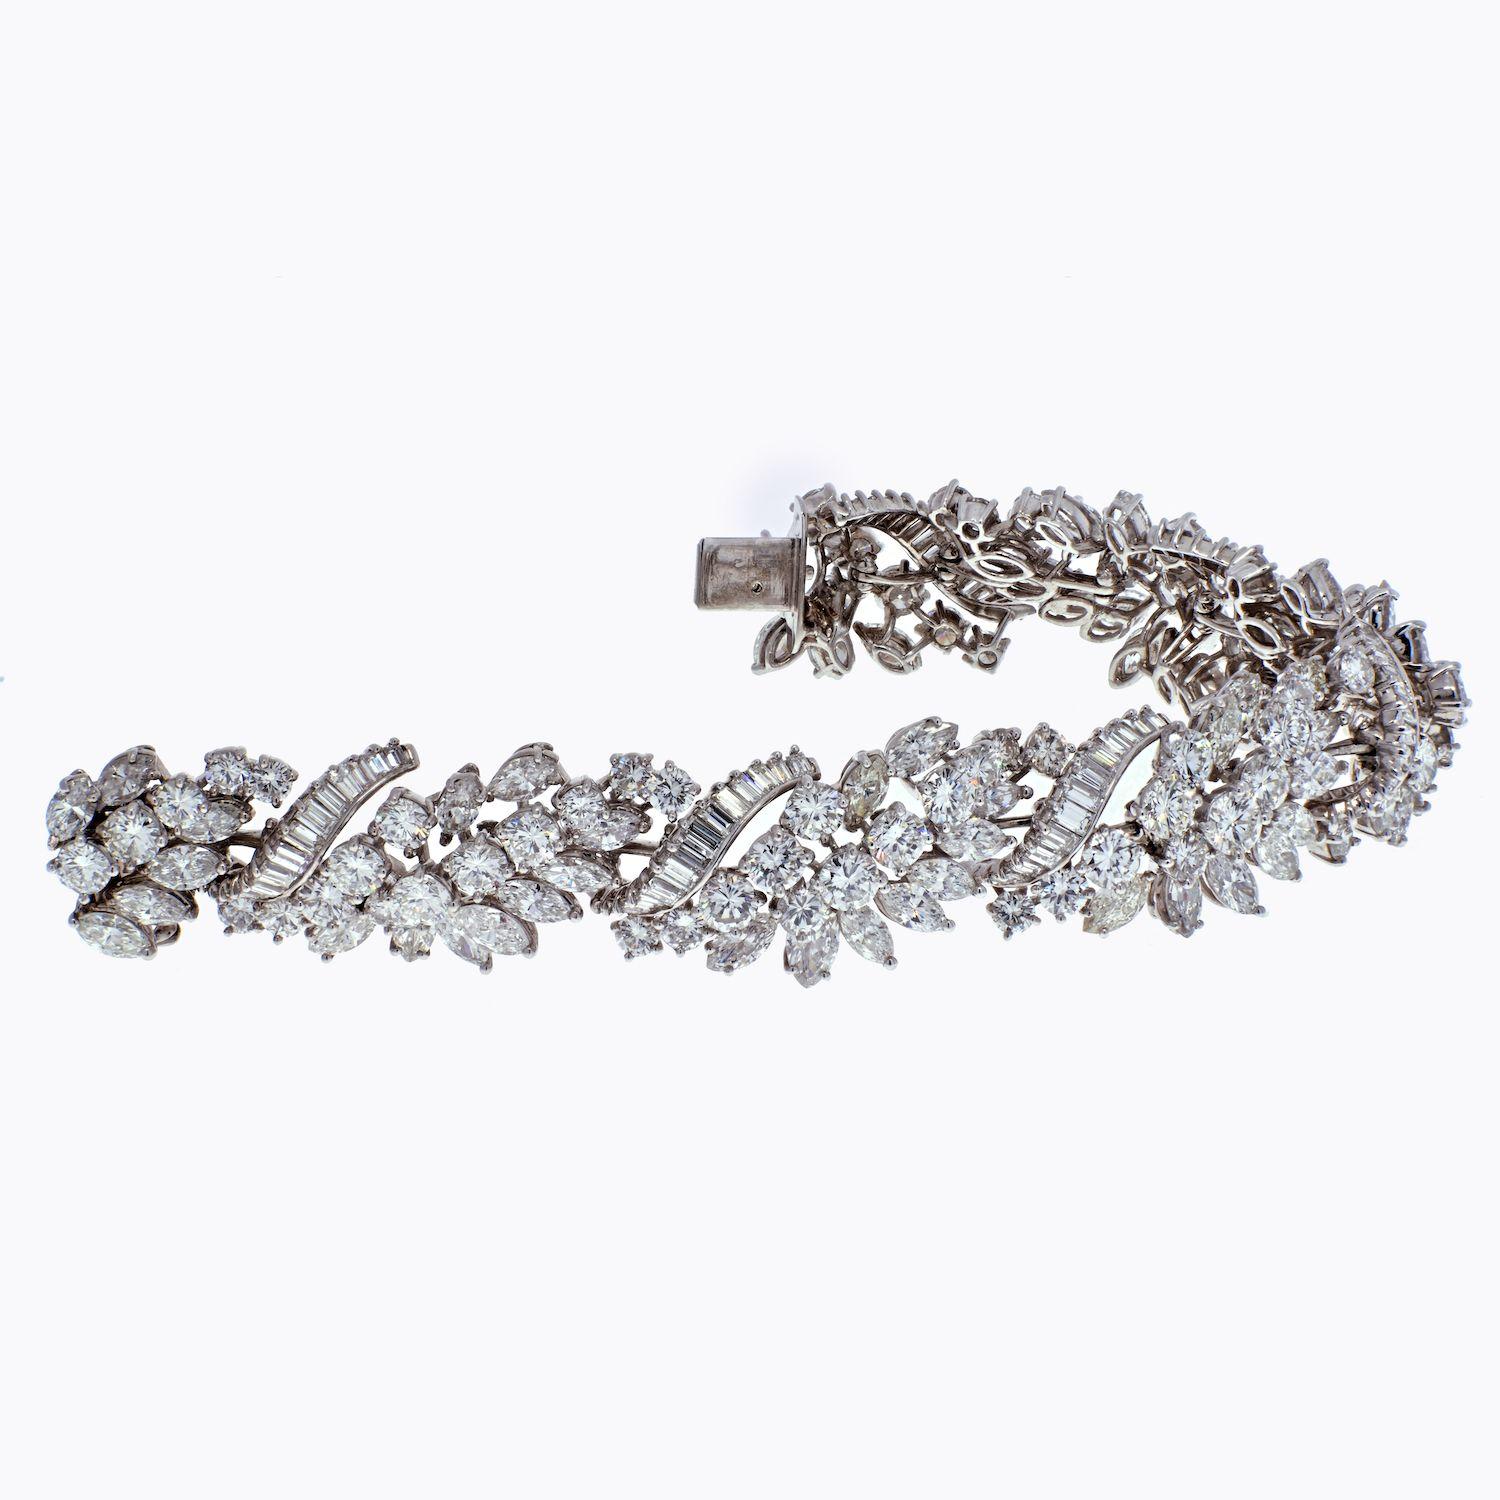 Platinum ladies diamond bracelet circa 1970's.
Crafted with round brilliant cuts, marquise cuts, and emerald cuts. 
Estimated carat weight: Rounds 20.00cts, Marquise Cuts 14.75cts, Emerald Cuts 5.25cts. 
Diamond quality: G-H color, VS1-VS2 clarity.